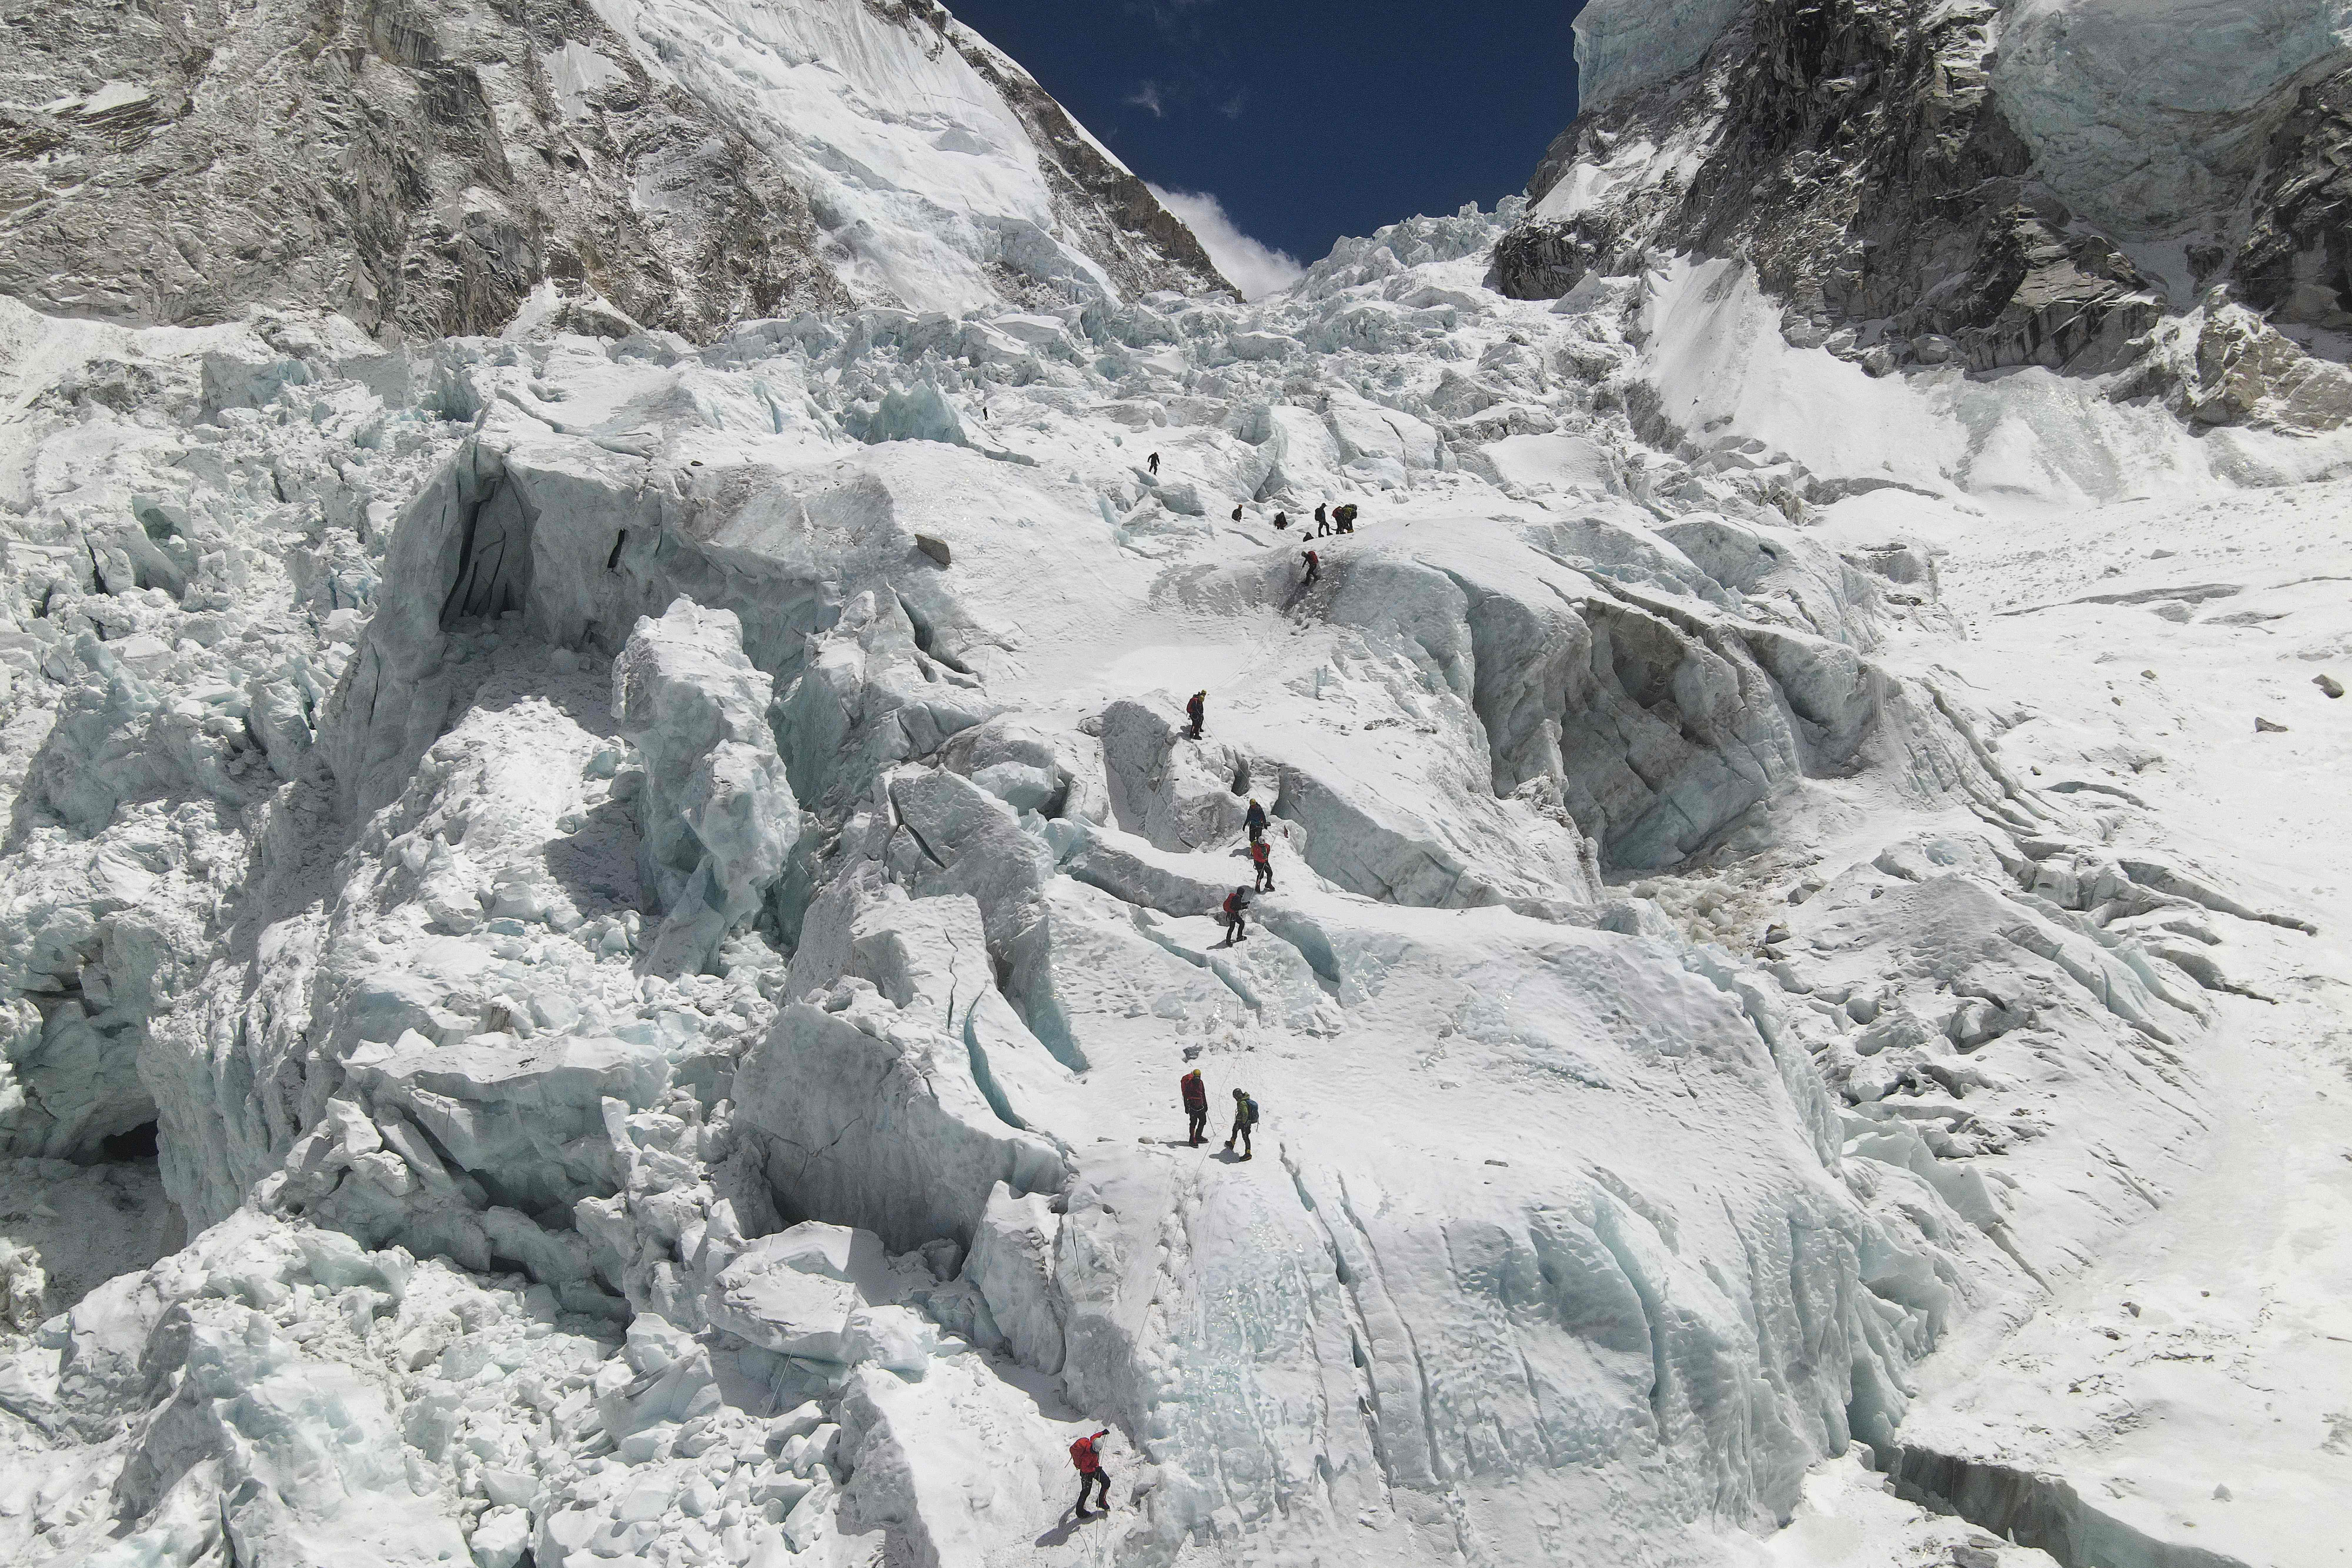 Climbers cross the Khumbu icefall of Mount Everest, as seen from the Everest Base Camp, some 140 km northeast of Kathmandu in 2021